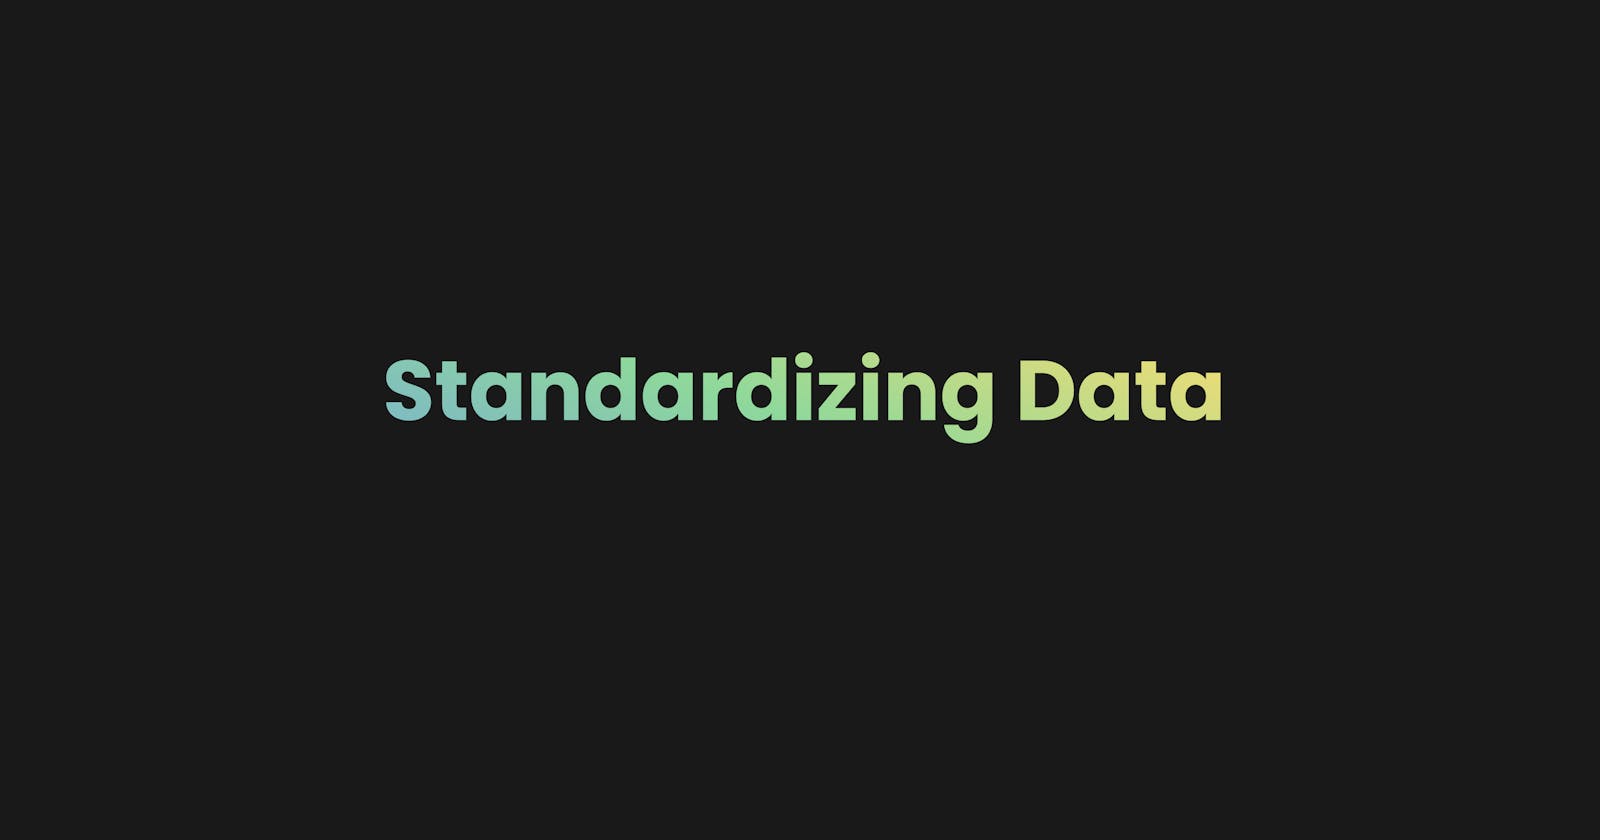 What is Data Standardization?